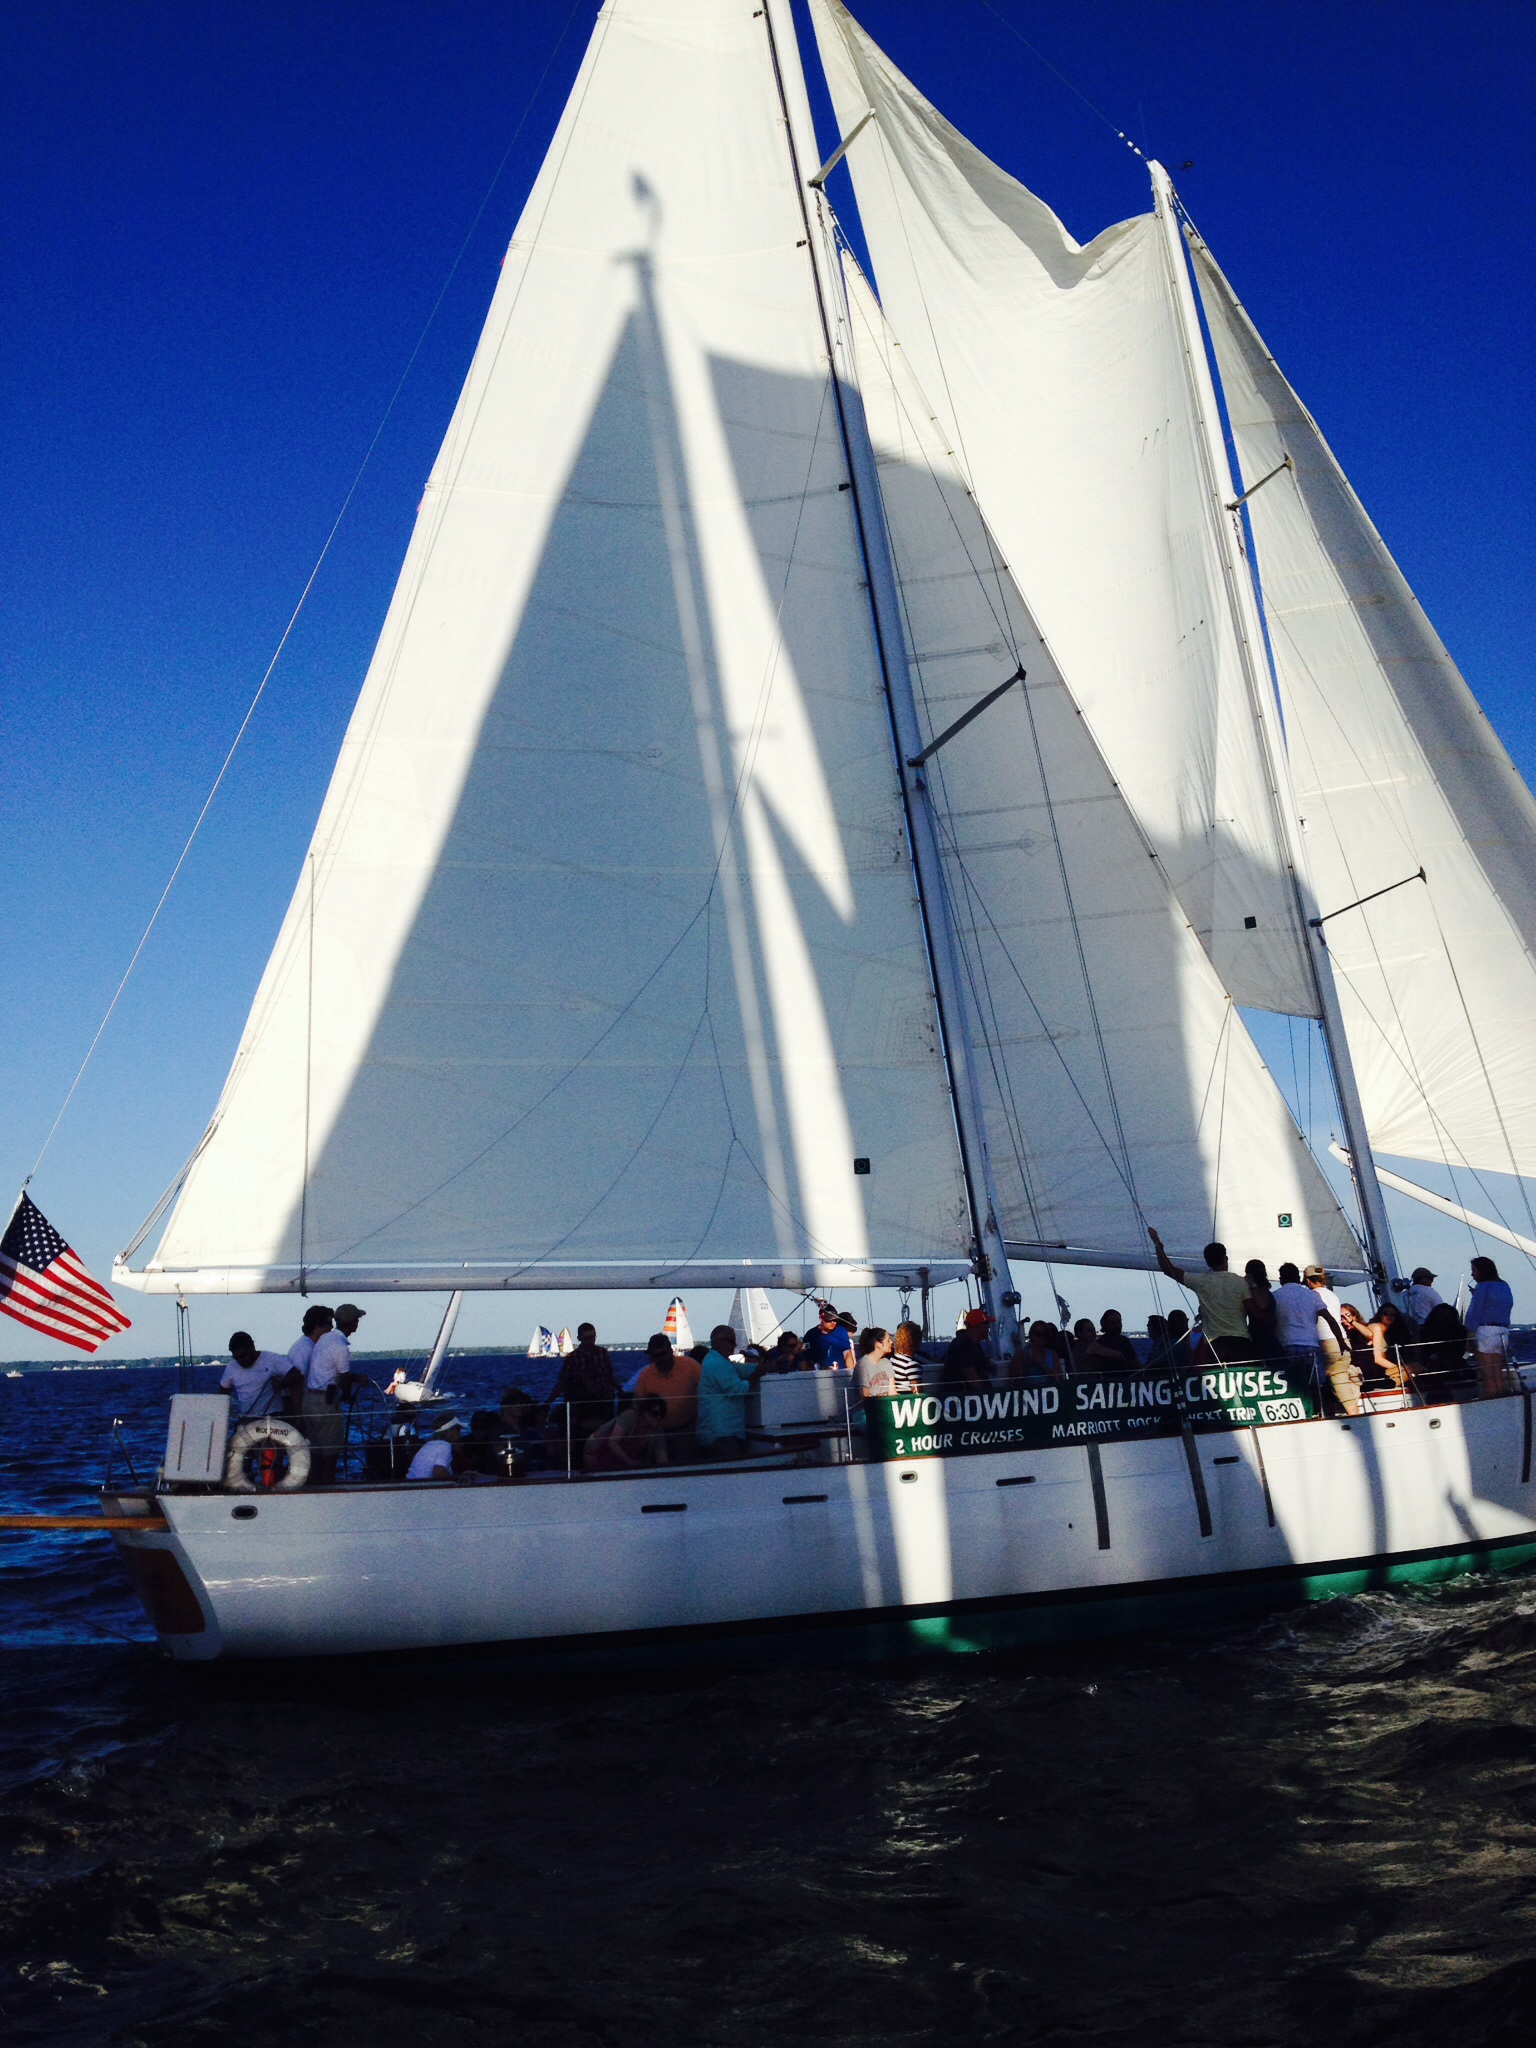 White sails of the schooner in full sail against bright blue skies